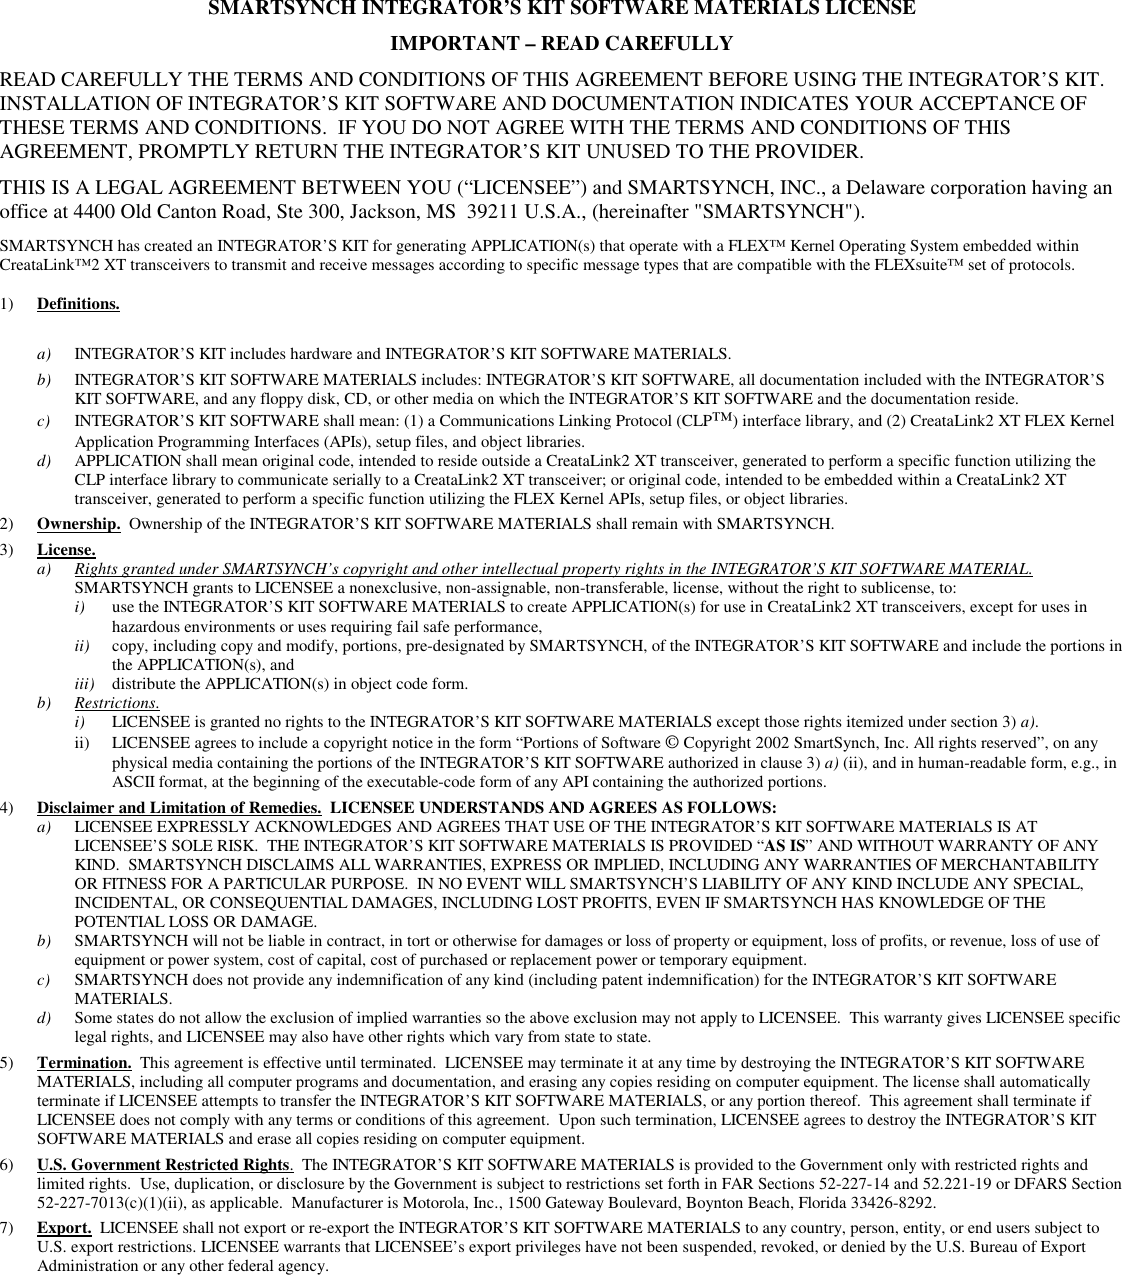 SMARTSYNCH INTEGRATOR’S KIT SOFTWARE MATERIALS LICENSE  IMPORTANT – READ CAREFULLY READ CAREFULLY THE TERMS AND CONDITIONS OF THIS AGREEMENT BEFORE USING THE INTEGRATOR’S KIT.  INSTALLATION OF INTEGRATOR’S KIT SOFTWARE AND DOCUMENTATION INDICATES YOUR ACCEPTANCE OF THESE TERMS AND CONDITIONS.  IF YOU DO NOT AGREE WITH THE TERMS AND CONDITIONS OF THIS AGREEMENT, PROMPTLY RETURN THE INTEGRATOR’S KIT UNUSED TO THE PROVIDER. THIS IS A LEGAL AGREEMENT BETWEEN YOU (“LICENSEE”) and SMARTSYNCH, INC., a Delaware corporation having an office at 4400 Old Canton Road, Ste 300, Jackson, MS  39211 U.S.A., (hereinafter &quot;SMARTSYNCH&quot;).   SMARTSYNCH has created an INTEGRATOR’S KIT for generating APPLICATION(s) that operate with a FLEX™ Kernel Operating System embedded within CreataLink™2 XT transceivers to transmit and receive messages according to specific message types that are compatible with the FLEXsuite™ set of protocols.   1)  Definitions.    a)  INTEGRATOR’S KIT includes hardware and INTEGRATOR’S KIT SOFTWARE MATERIALS. b)  INTEGRATOR’S KIT SOFTWARE MATERIALS includes: INTEGRATOR’S KIT SOFTWARE, all documentation included with the INTEGRATOR’S KIT SOFTWARE, and any floppy disk, CD, or other media on which the INTEGRATOR’S KIT SOFTWARE and the documentation reside.  c)  INTEGRATOR’S KIT SOFTWARE shall mean: (1) a Communications Linking Protocol (CLP™) interface library, and (2) CreataLink2 XT FLEX Kernel Application Programming Interfaces (APIs), setup files, and object libraries.   d)  APPLICATION shall mean original code, intended to reside outside a CreataLink2 XT transceiver, generated to perform a specific function utilizing the CLP interface library to communicate serially to a CreataLink2 XT transceiver; or original code, intended to be embedded within a CreataLink2 XT transceiver, generated to perform a specific function utilizing the FLEX Kernel APIs, setup files, or object libraries.   2)  Ownership.  Ownership of the INTEGRATOR’S KIT SOFTWARE MATERIALS shall remain with SMARTSYNCH.   3)  License. a)  Rights granted under SMARTSYNCH’s copyright and other intellectual property rights in the INTEGRATOR’S KIT SOFTWARE MATERIAL.   SMARTSYNCH grants to LICENSEE a nonexclusive, non-assignable, non-transferable, license, without the right to sublicense, to:  i)  use the INTEGRATOR’S KIT SOFTWARE MATERIALS to create APPLICATION(s) for use in CreataLink2 XT transceivers, except for uses in hazardous environments or uses requiring fail safe performance,  ii)  copy, including copy and modify, portions, pre-designated by SMARTSYNCH, of the INTEGRATOR’S KIT SOFTWARE and include the portions in the APPLICATION(s), and iii)  distribute the APPLICATION(s) in object code form.  b) Restrictions.  i)  LICENSEE is granted no rights to the INTEGRATOR’S KIT SOFTWARE MATERIALS except those rights itemized under section 3) a).  ii)  LICENSEE agrees to include a copyright notice in the form “Portions of Software © Copyright 2002 SmartSynch, Inc. All rights reserved”, on any physical media containing the portions of the INTEGRATOR’S KIT SOFTWARE authorized in clause 3) a) (ii), and in human-readable form, e.g., in ASCII format, at the beginning of the executable-code form of any API containing the authorized portions.  4)  Disclaimer and Limitation of Remedies.  LICENSEE UNDERSTANDS AND AGREES AS FOLLOWS: a)  LICENSEE EXPRESSLY ACKNOWLEDGES AND AGREES THAT USE OF THE INTEGRATOR’S KIT SOFTWARE MATERIALS IS AT LICENSEE’S SOLE RISK.  THE INTEGRATOR’S KIT SOFTWARE MATERIALS IS PROVIDED “AS IS” AND WITHOUT WARRANTY OF ANY KIND.  SMARTSYNCH DISCLAIMS ALL WARRANTIES, EXPRESS OR IMPLIED, INCLUDING ANY WARRANTIES OF MERCHANTABILITY OR FITNESS FOR A PARTICULAR PURPOSE.  IN NO EVENT WILL SMARTSYNCH’S LIABILITY OF ANY KIND INCLUDE ANY SPECIAL, INCIDENTAL, OR CONSEQUENTIAL DAMAGES, INCLUDING LOST PROFITS, EVEN IF SMARTSYNCH HAS KNOWLEDGE OF THE POTENTIAL LOSS OR DAMAGE. b)  SMARTSYNCH will not be liable in contract, in tort or otherwise for damages or loss of property or equipment, loss of profits, or revenue, loss of use of equipment or power system, cost of capital, cost of purchased or replacement power or temporary equipment. c)  SMARTSYNCH does not provide any indemnification of any kind (including patent indemnification) for the INTEGRATOR’S KIT SOFTWARE MATERIALS. d) Some states do not allow the exclusion of implied warranties so the above exclusion may not apply to LICENSEE.  This warranty gives LICENSEE specific legal rights, and LICENSEE may also have other rights which vary from state to state. 5)  Termination.  This agreement is effective until terminated.  LICENSEE may terminate it at any time by destroying the INTEGRATOR’S KIT SOFTWARE MATERIALS, including all computer programs and documentation, and erasing any copies residing on computer equipment. The license shall automatically terminate if LICENSEE attempts to transfer the INTEGRATOR’S KIT SOFTWARE MATERIALS, or any portion thereof.  This agreement shall terminate if LICENSEE does not comply with any terms or conditions of this agreement.  Upon such termination, LICENSEE agrees to destroy the INTEGRATOR’S KIT SOFTWARE MATERIALS and erase all copies residing on computer equipment. 6)  U.S. Government Restricted Rights.  The INTEGRATOR’S KIT SOFTWARE MATERIALS is provided to the Government only with restricted rights and limited rights.  Use, duplication, or disclosure by the Government is subject to restrictions set forth in FAR Sections 52-227-14 and 52.221-19 or DFARS Section 52-227-7013(c)(1)(ii), as applicable.  Manufacturer is Motorola, Inc., 1500 Gateway Boulevard, Boynton Beach, Florida 33426-8292. 7)  Export.  LICENSEE shall not export or re-export the INTEGRATOR’S KIT SOFTWARE MATERIALS to any country, person, entity, or end users subject to U.S. export restrictions. LICENSEE warrants that LICENSEE’s export privileges have not been suspended, revoked, or denied by the U.S. Bureau of Export Administration or any other federal agency.  